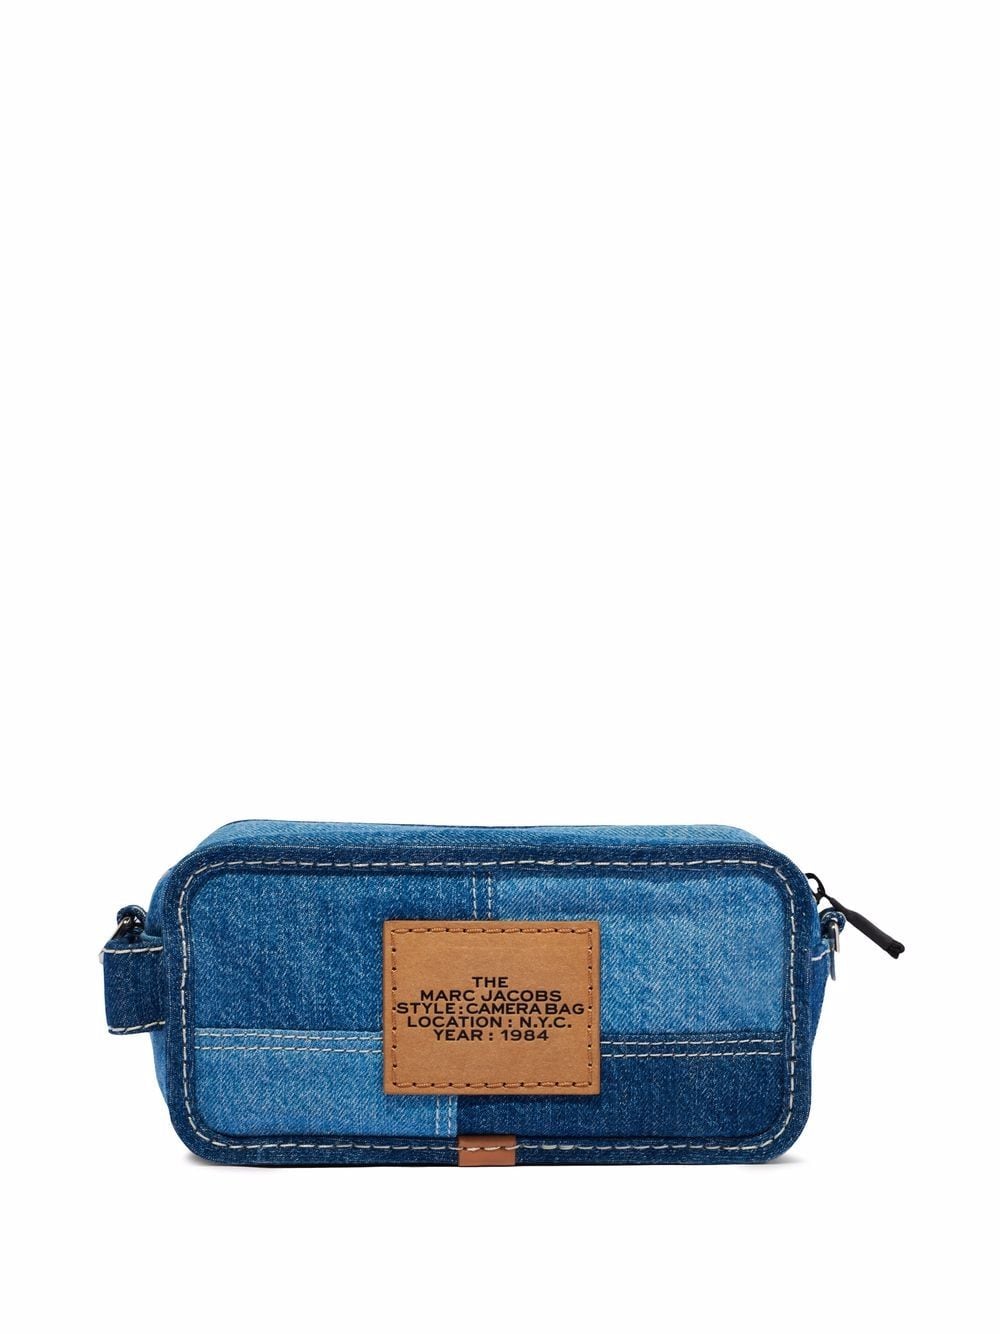 The Camera Bag Marc Jacobs in denim